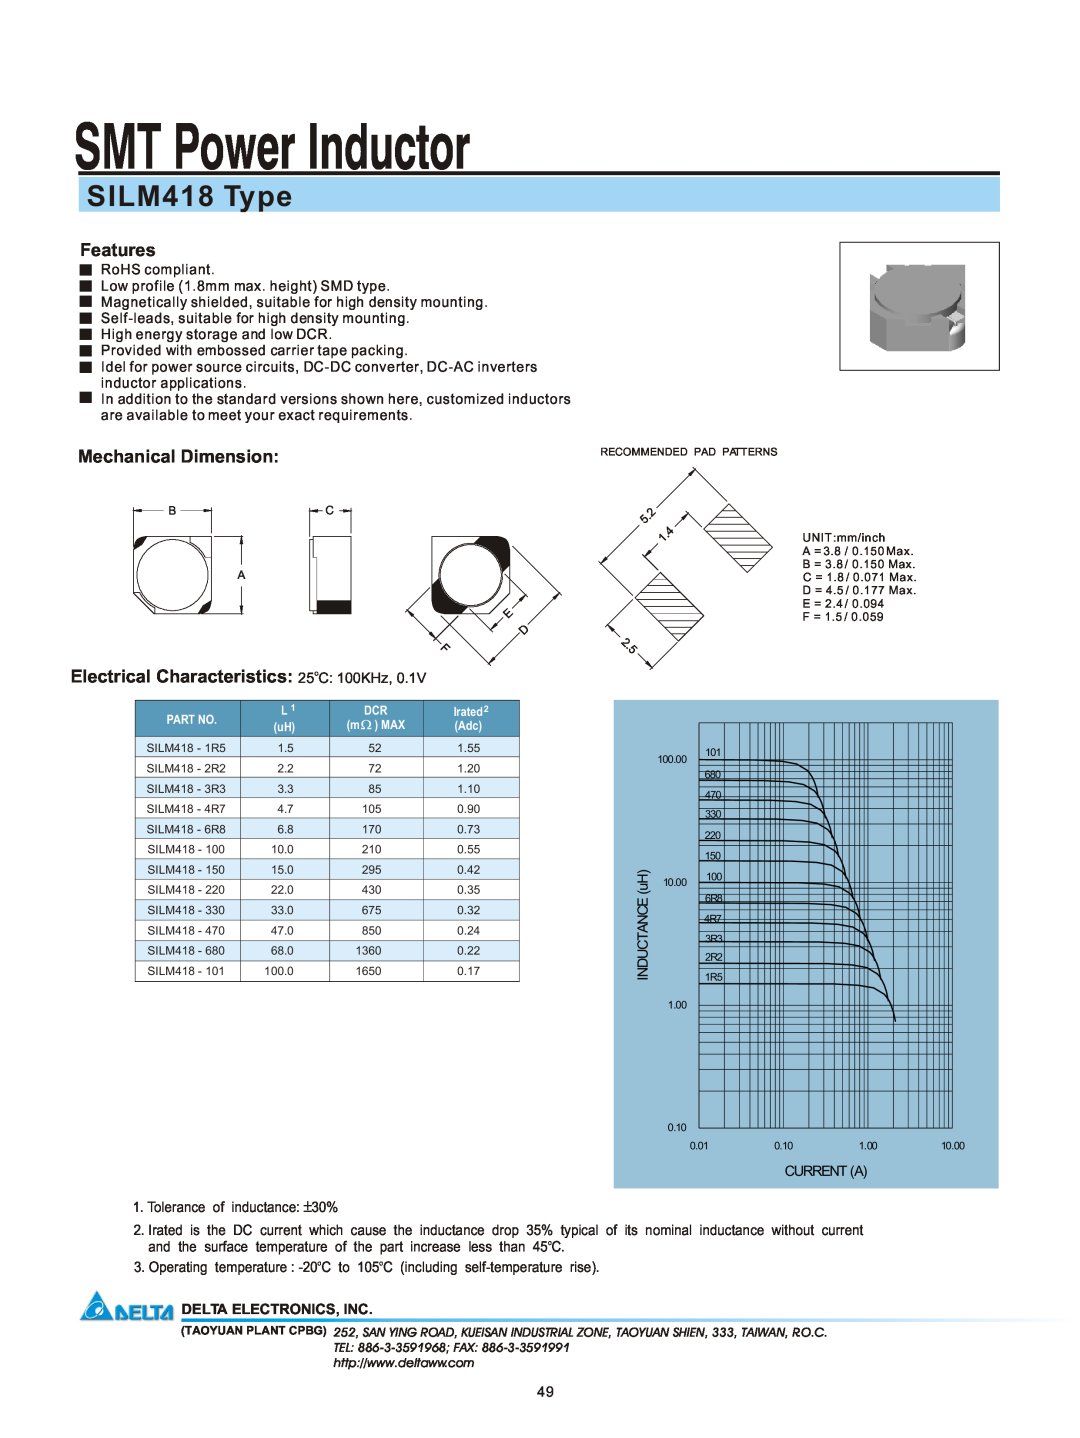 Delta Electronics manual SMT Power Inductor, SILM418 Type, Features, Mechanical Dimension, Delta Electronics, Inc 